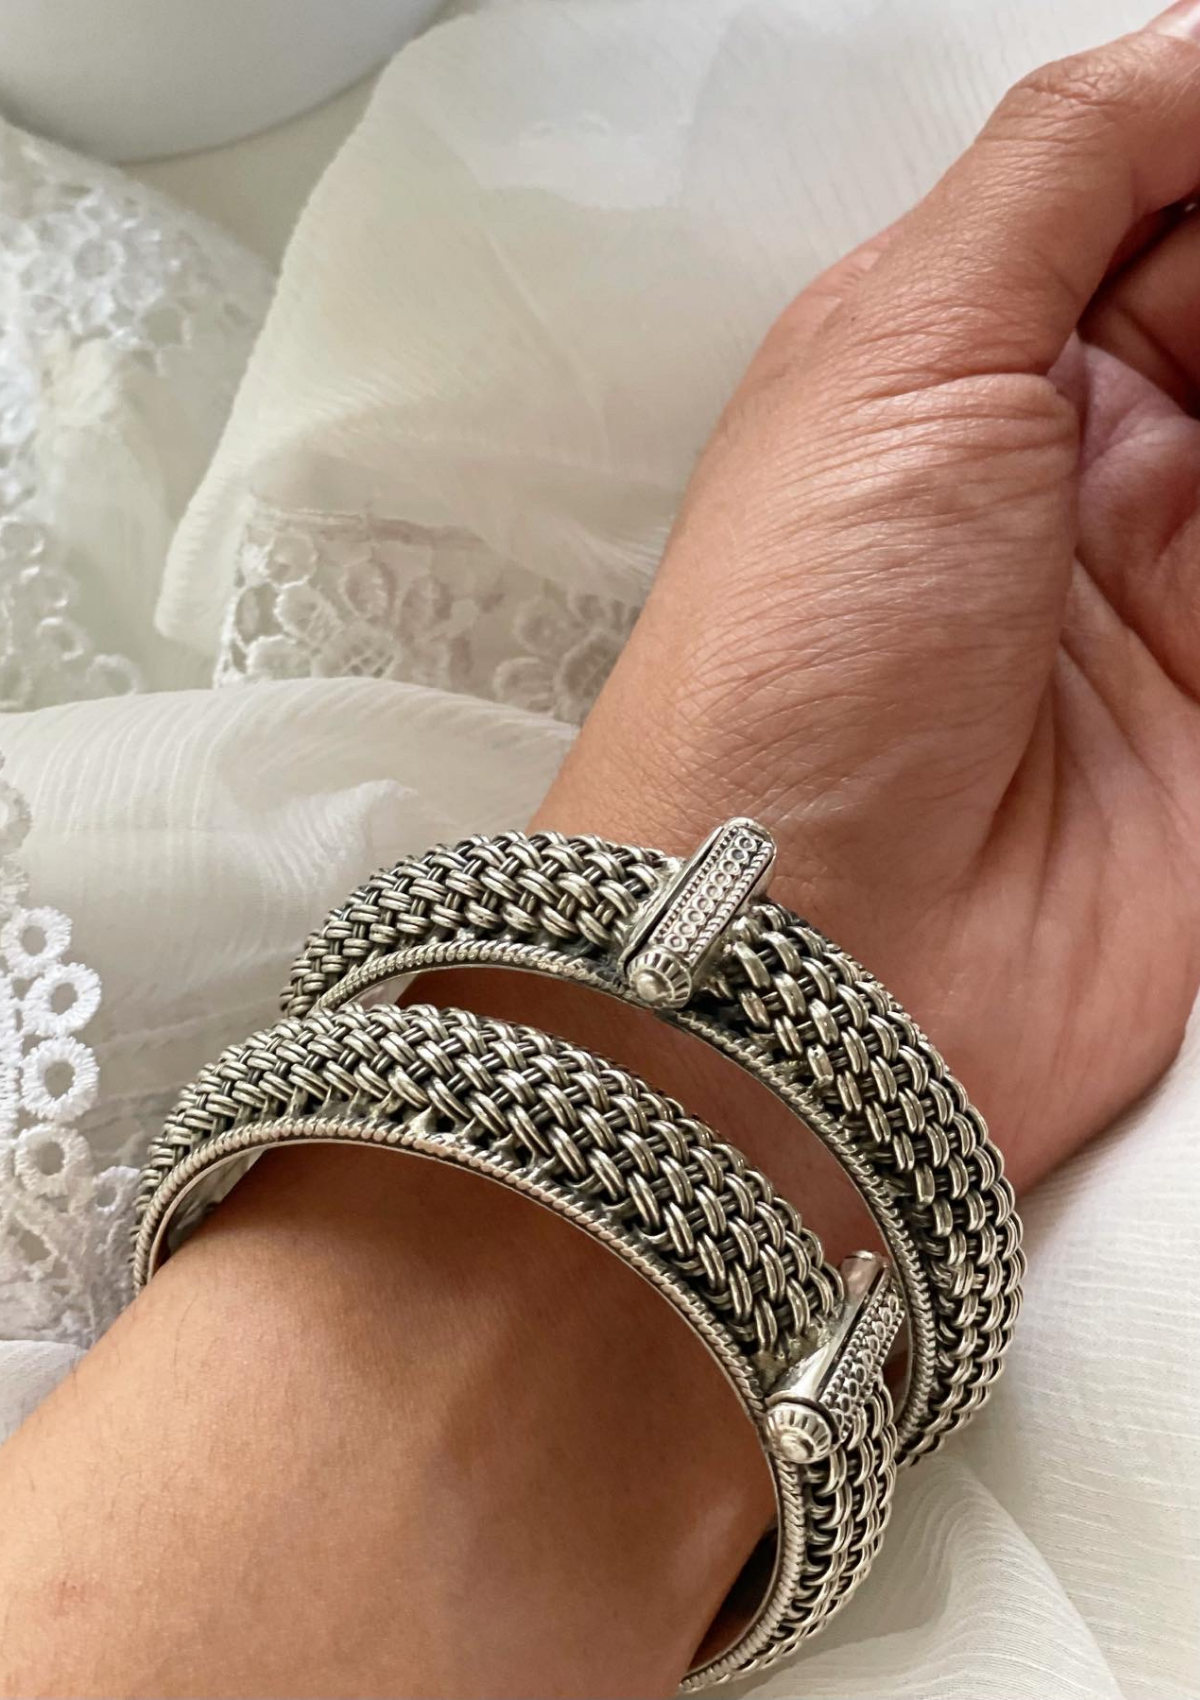 Roop bangles with sterling silver and an intricate design